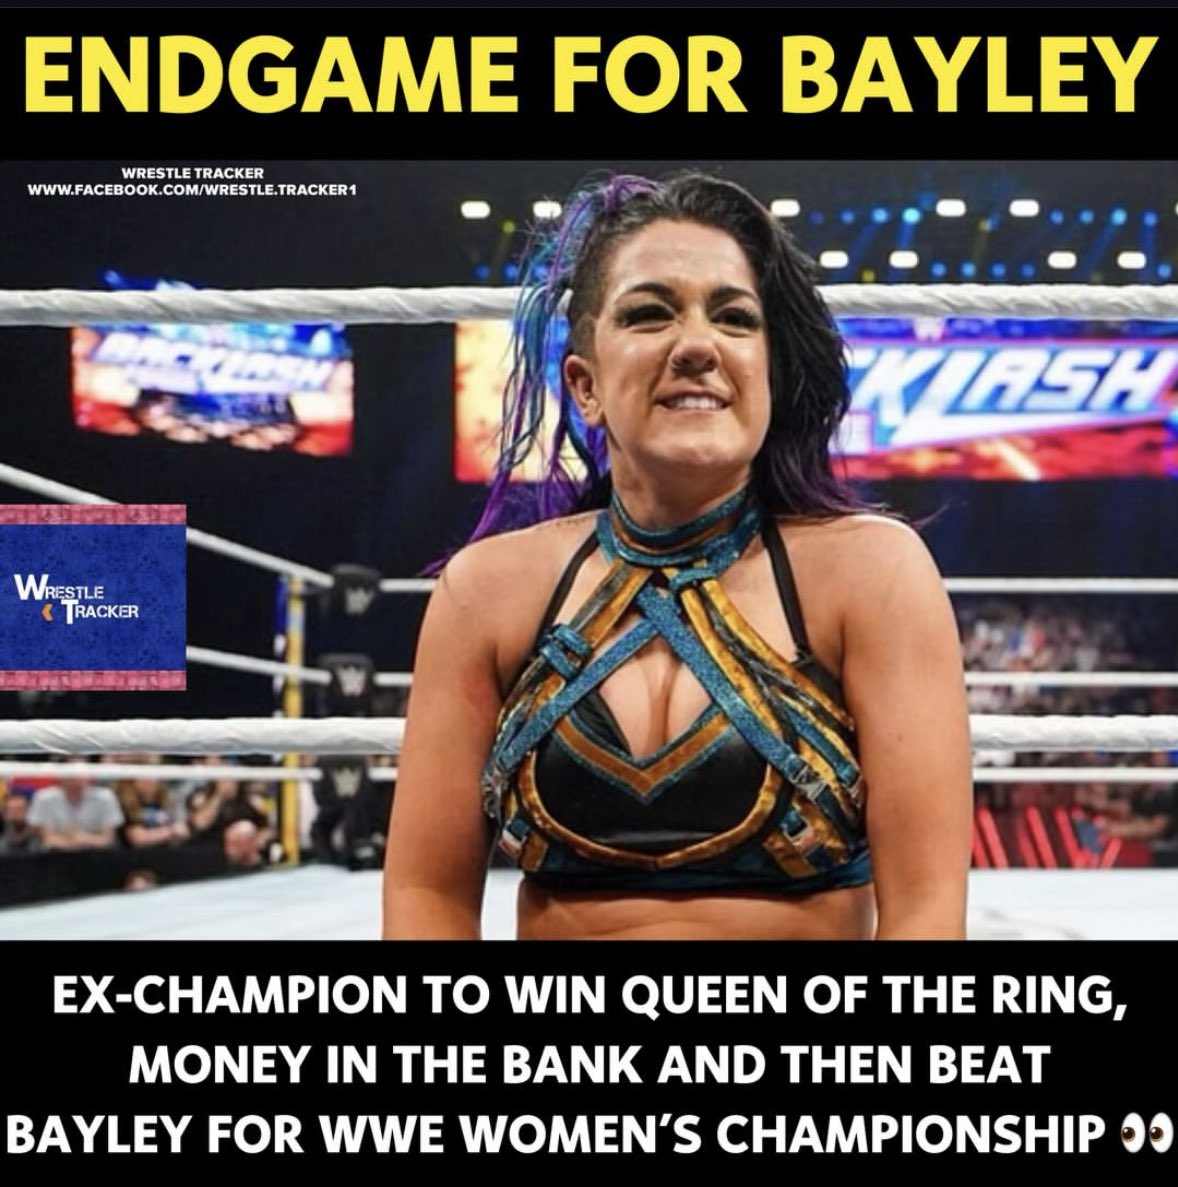 Ex-champion could dethrone Bayley after winning Money in the Bank and Queen of the Ring, says WWE personality 👉 bit.ly/3y6aDuQ #WWE #Bayley